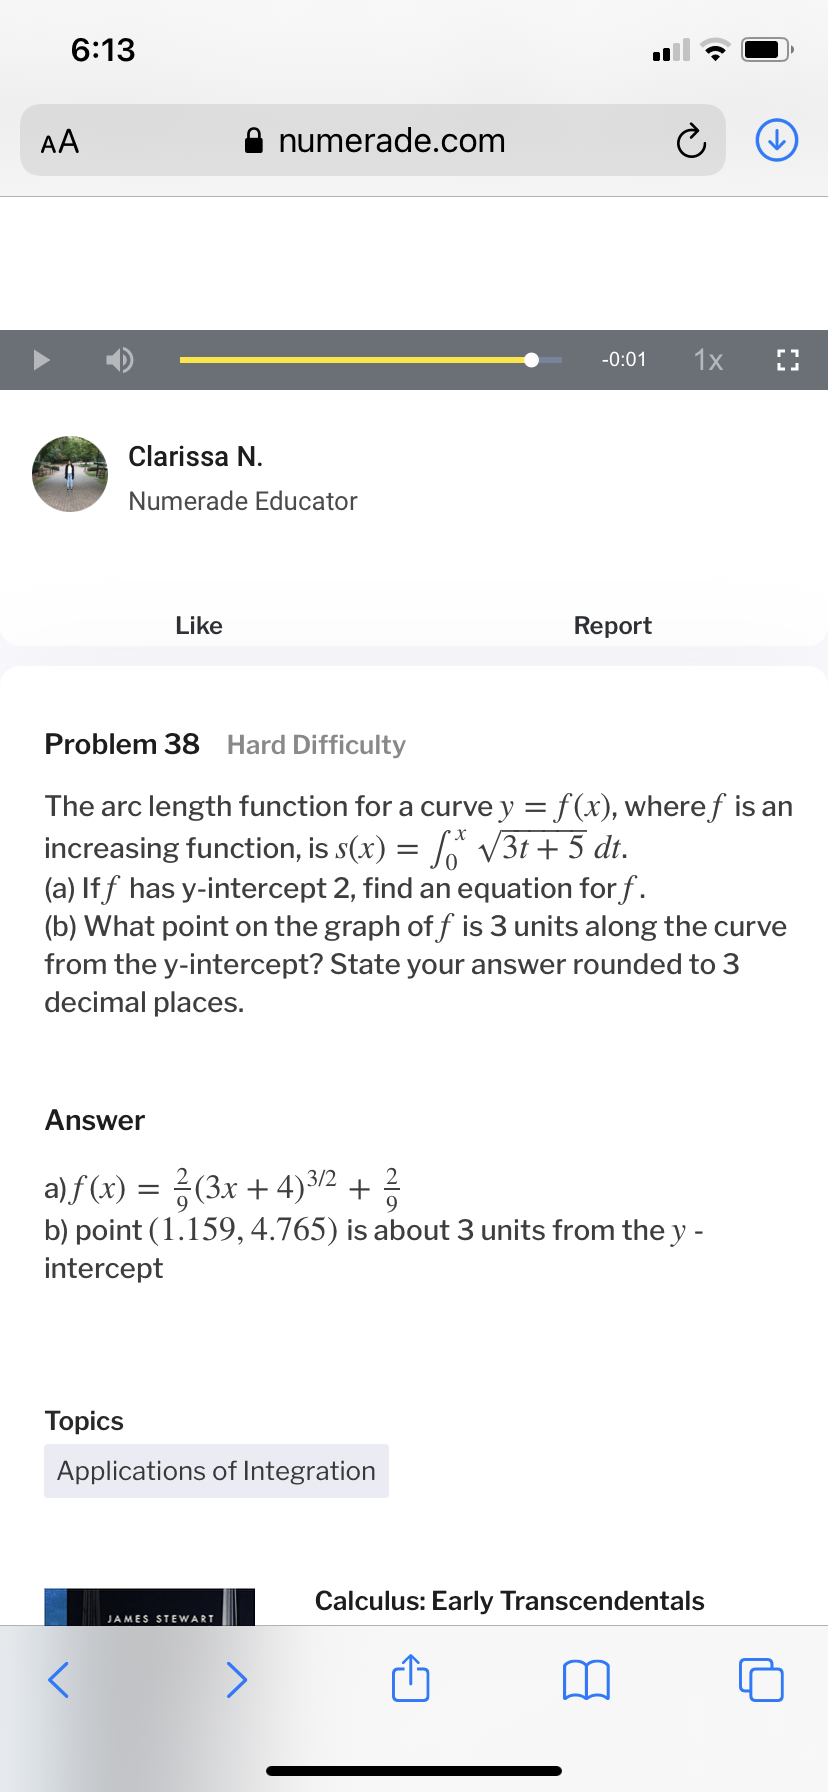 6:13
AA
numerade.com
-0:01
1x
Clarissa N.
Numerade Educator
Like
Report
Problem 38 Hard Difficulty
The arc length function for a curve y = f(x), wheref is an
increasing function, is s(x) = V3t + 5 dt.
(a) If f has y-intercept 2, find an equation for f.
(b) What point on the graph of f is 3 units along the curve
from the y-intercept? State your answer rounded to 3
decimal places.
Answer
a) f (x) = ?(3x + 4)3/2 + 3
b) point (1.159, 4.765) is about 3 units from the y -
intercept
Topics
Applications of Integration
Calculus: Early Transcendentals
JAMES STEWART
<>
